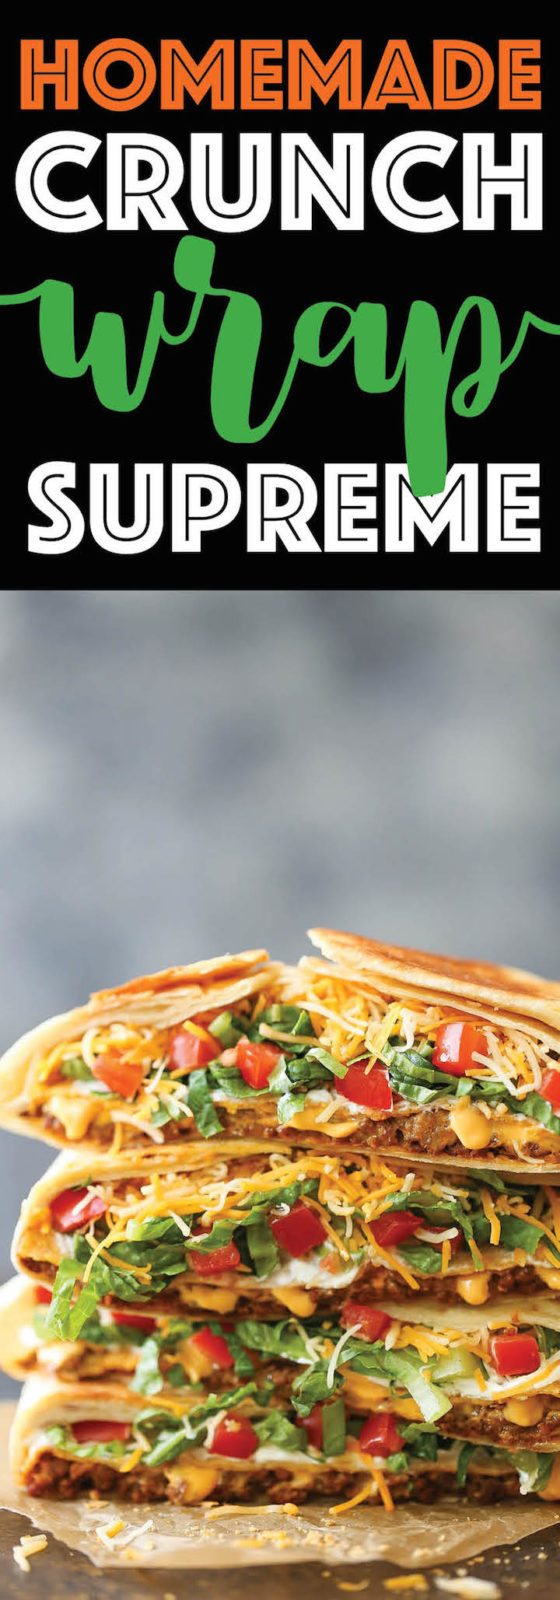 whats in a crunch wrap supreme